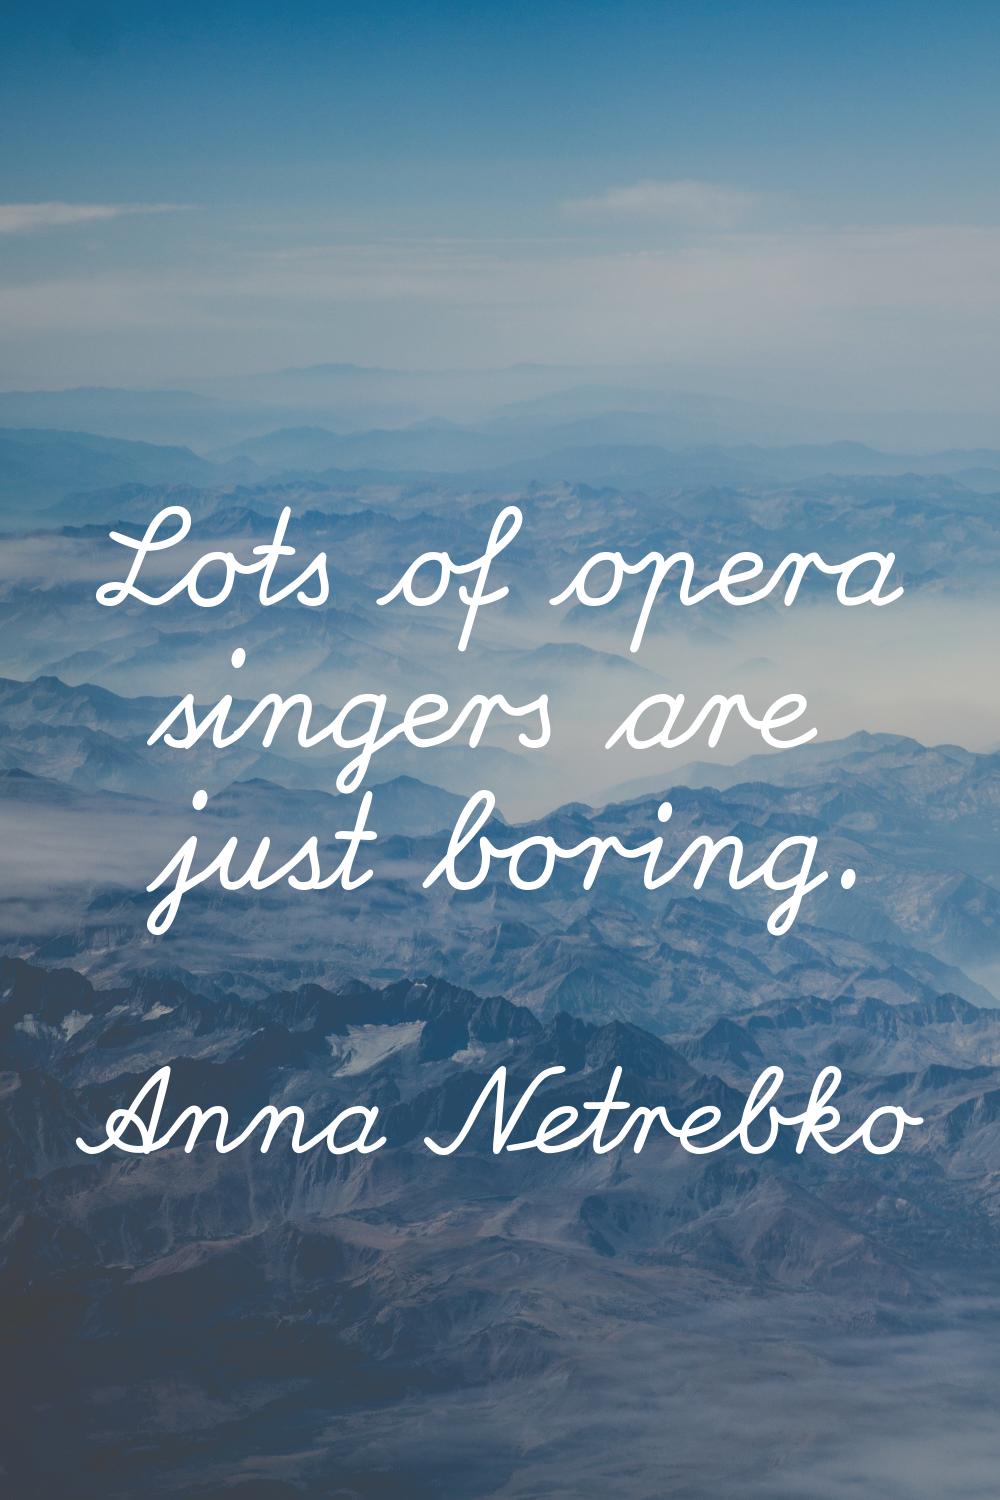 Lots of opera singers are just boring.